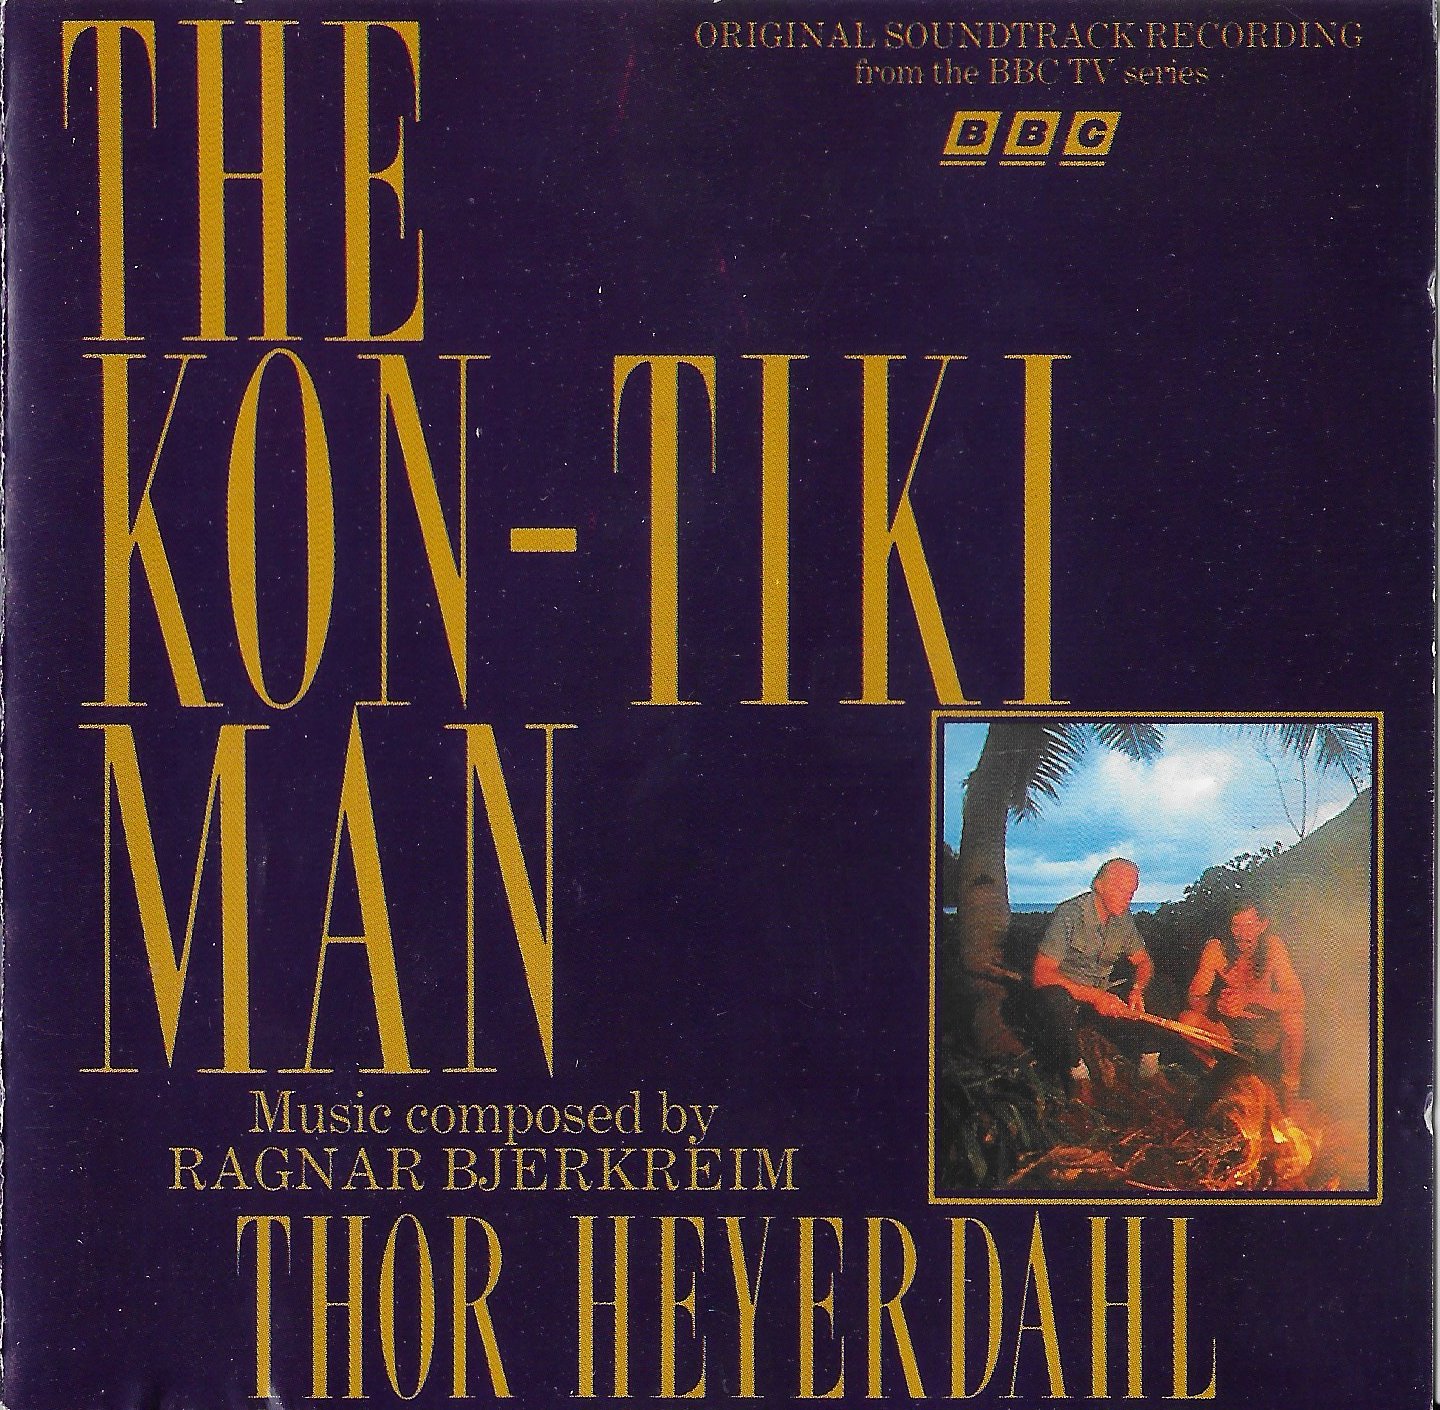 Picture of BBCCD780 The Kon-Tiki man by artist Ragnar Bjerkreim from the BBC cds - Records and Tapes library